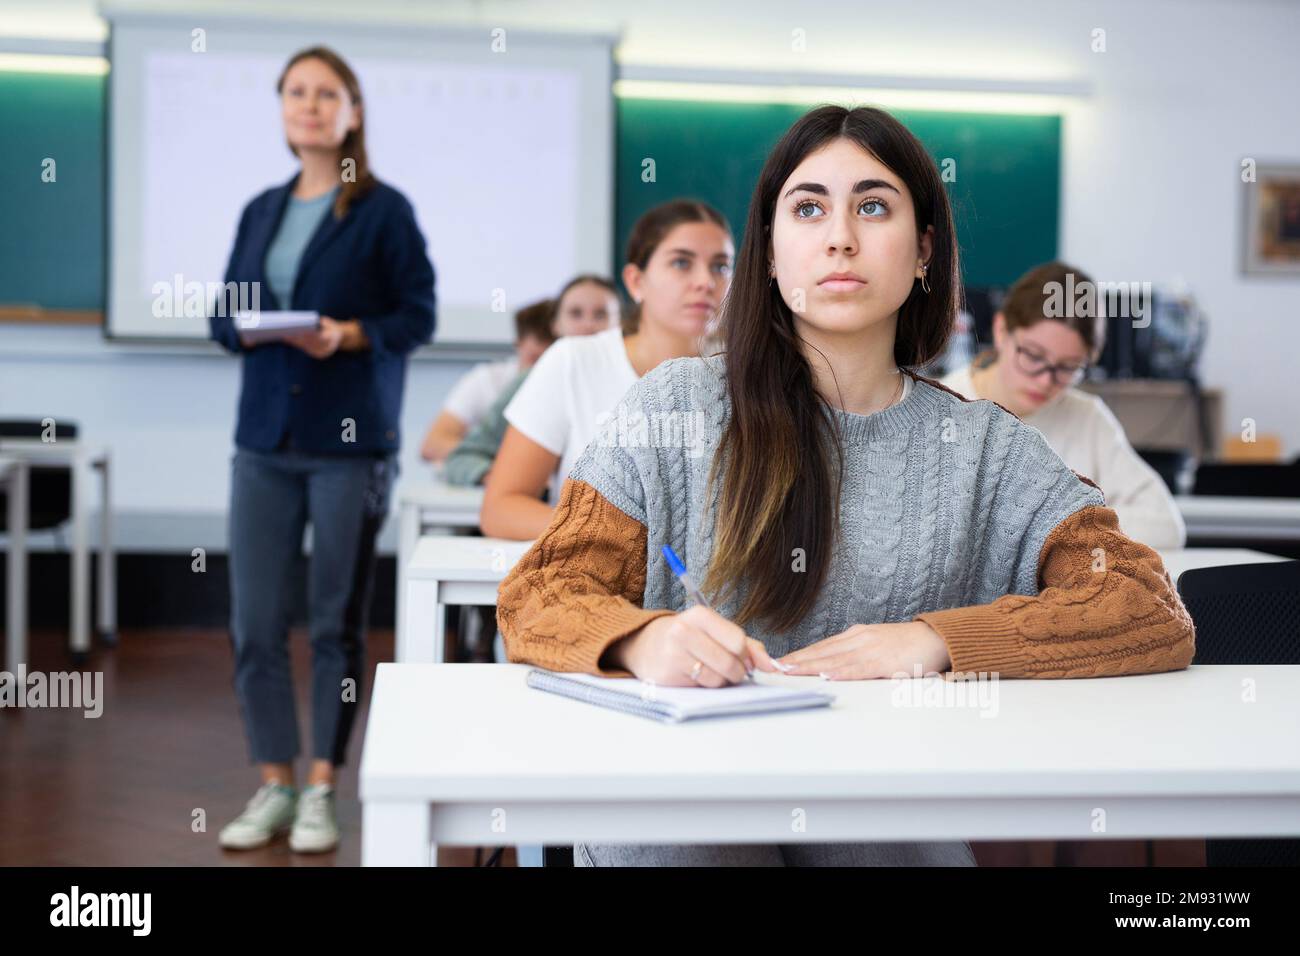 Female student sit at desk and makes notes Stock Photo